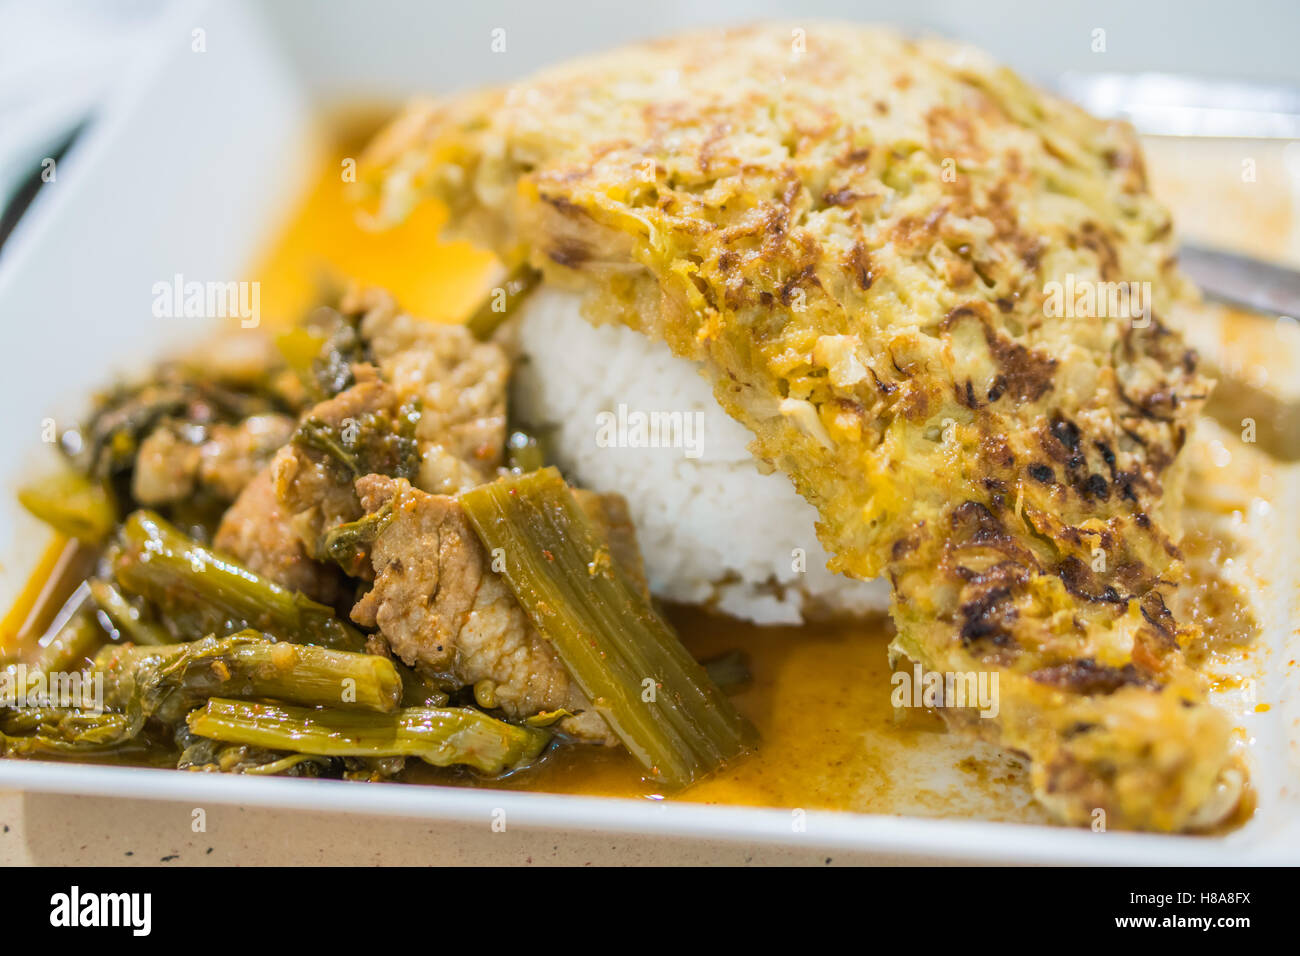 Fried pork and Omelet on rice,Thai menu Stock Photo